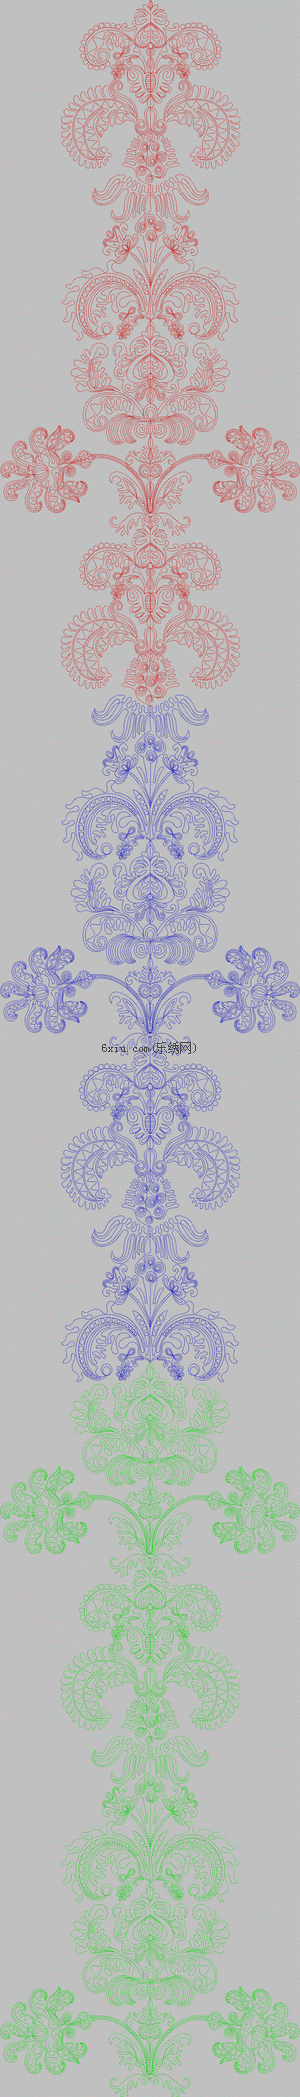 Abstract sleeve curve embroidery pattern album